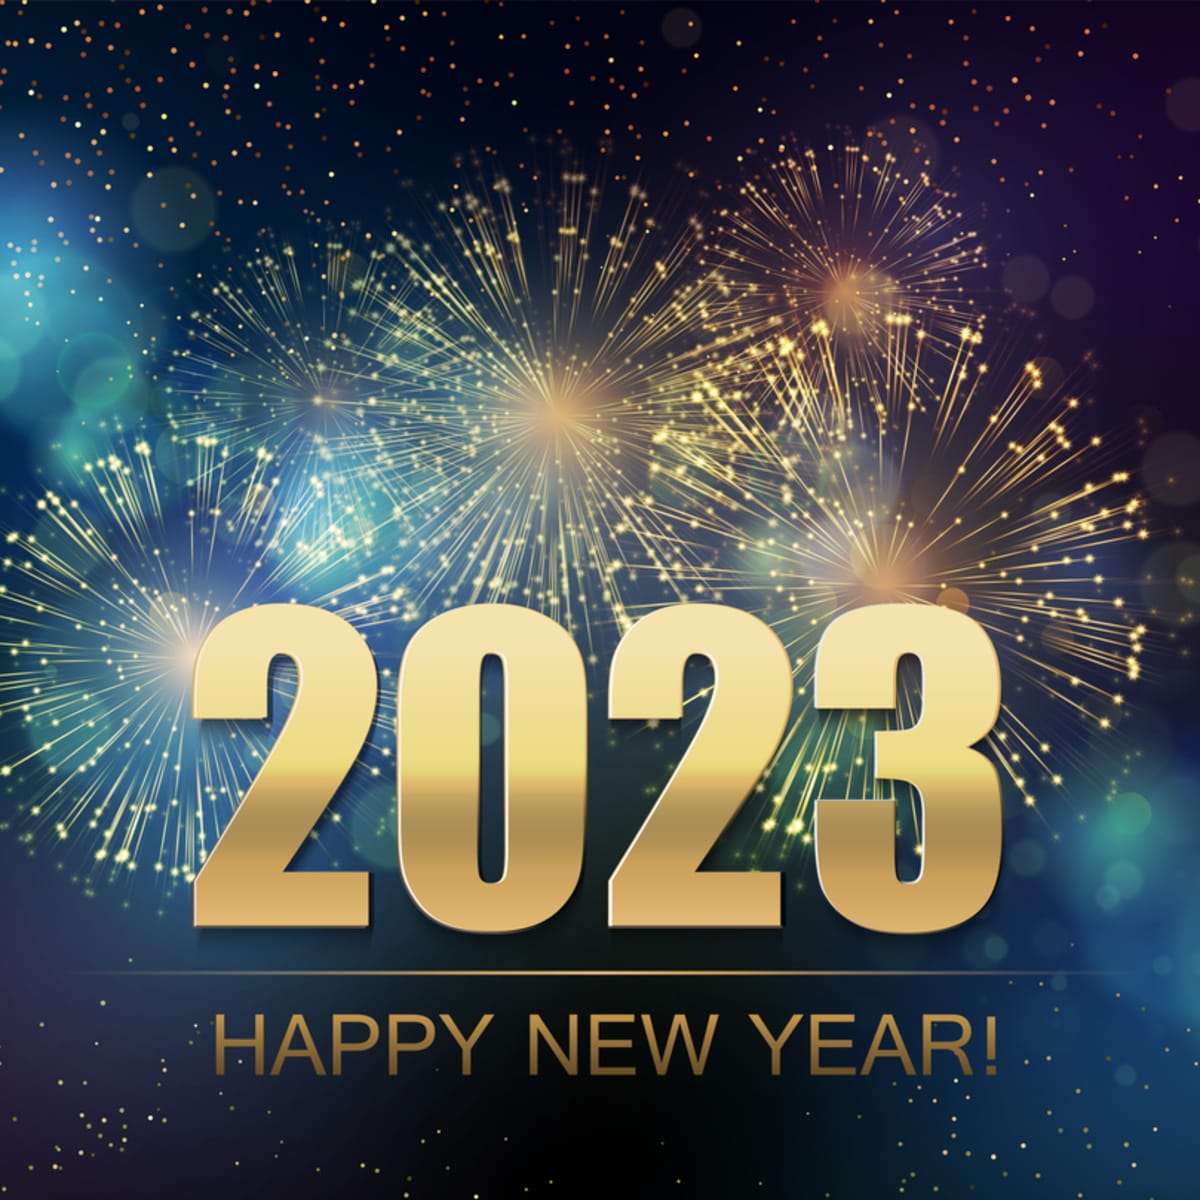 Happy New Year 2023 Wishes: Entertainment, Recipes, Health, Life, Holidays